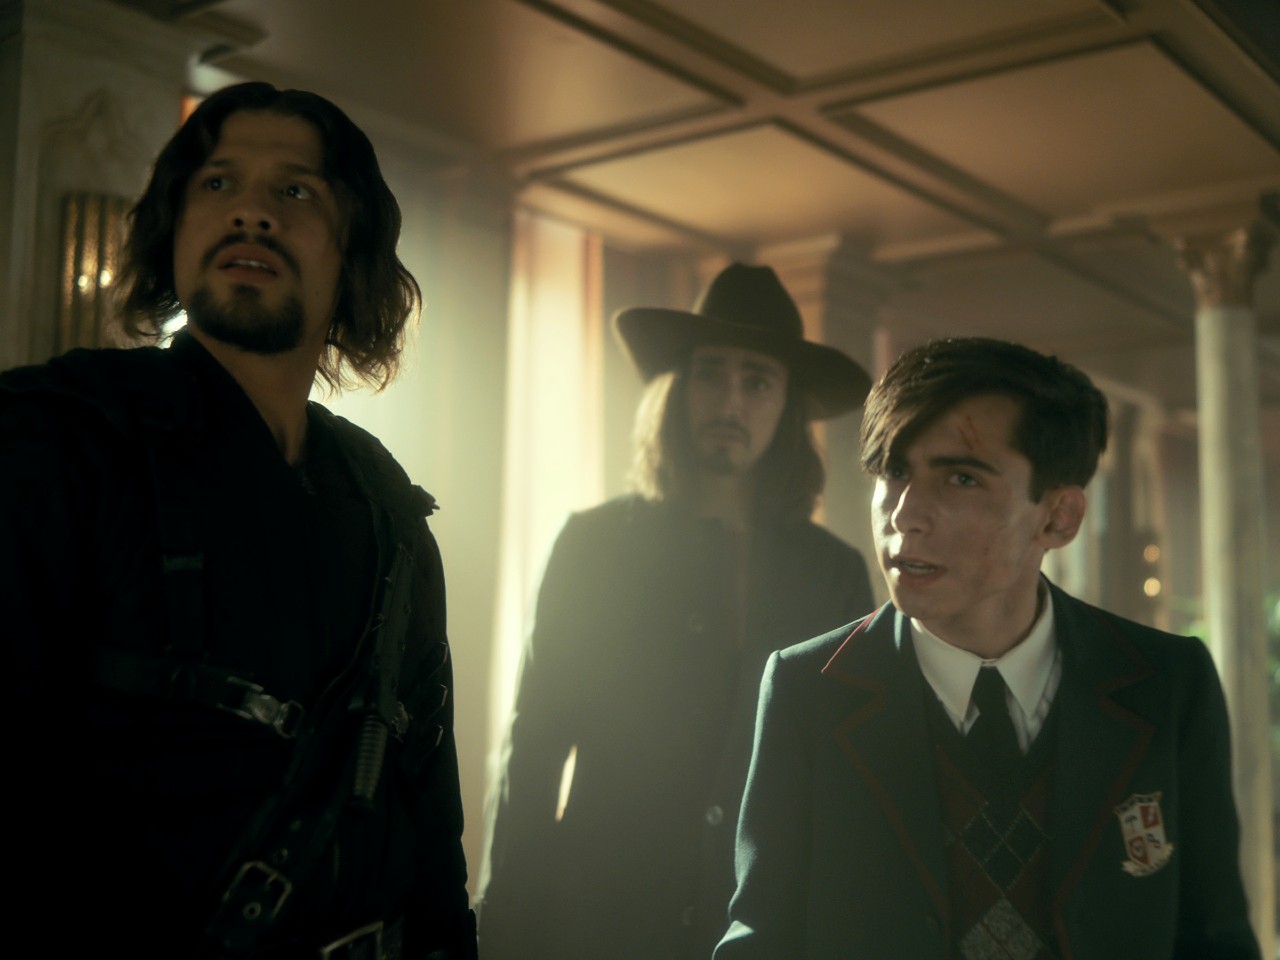 Diego, Klaus, and Five look quizzically ahead in an image from The Umbrella Academy season 3.